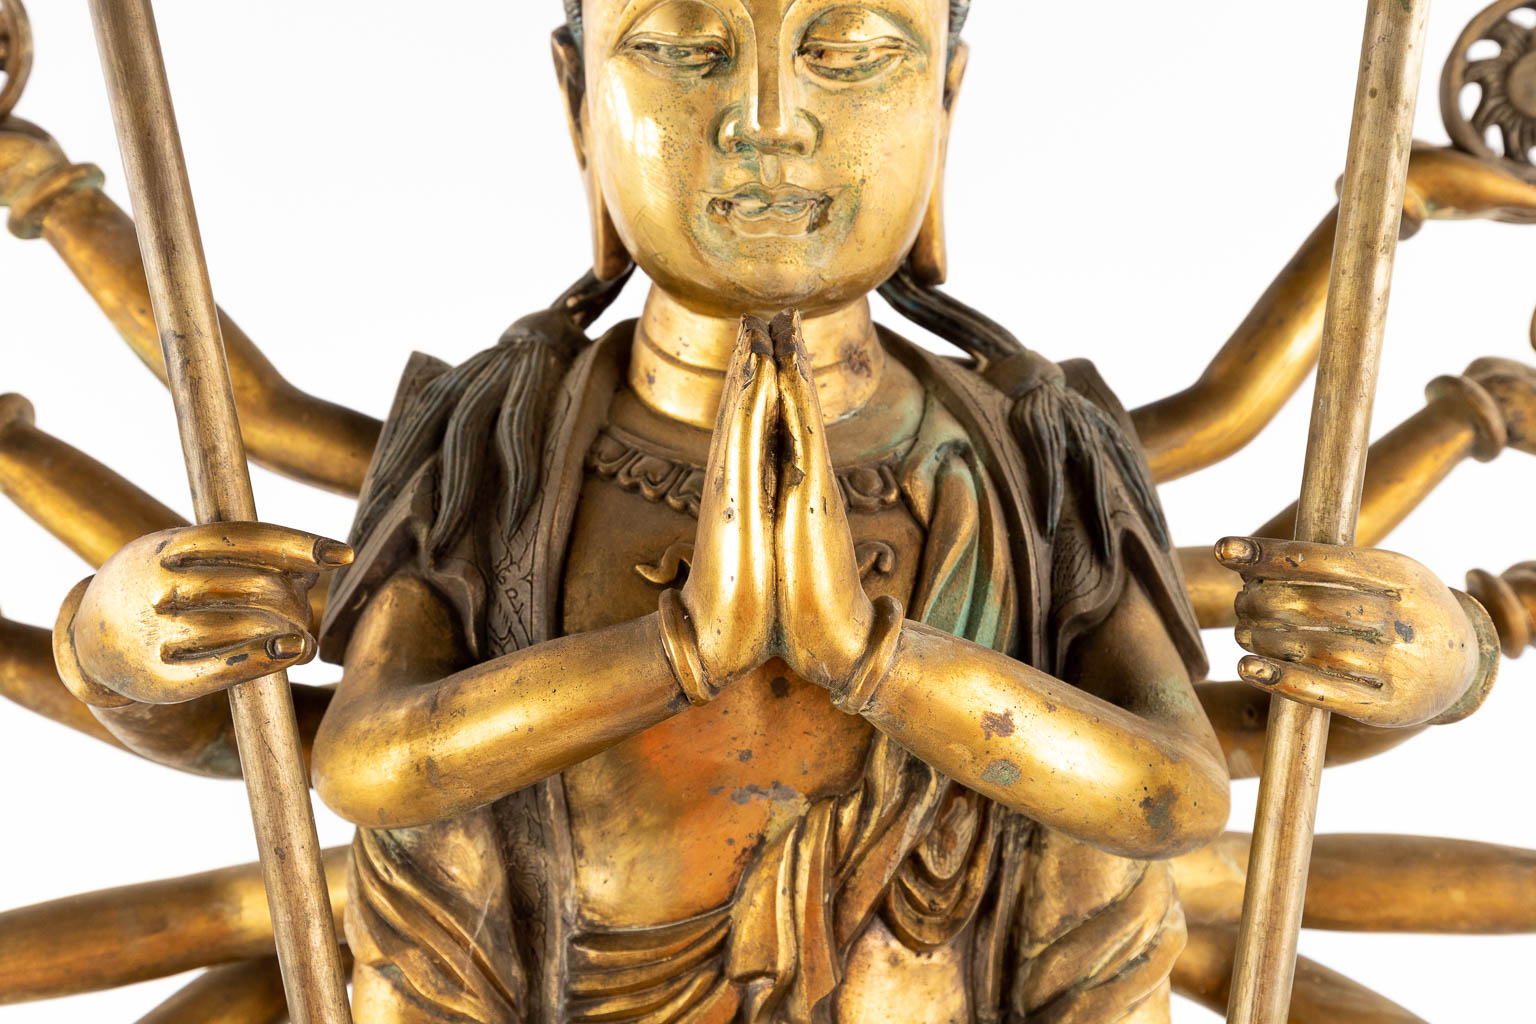 A Bodhisattva or GuanYin with 1000 arms, bronze with 18 arms and Taoist symbols. 20th C. (W:47 x H:78 cm)